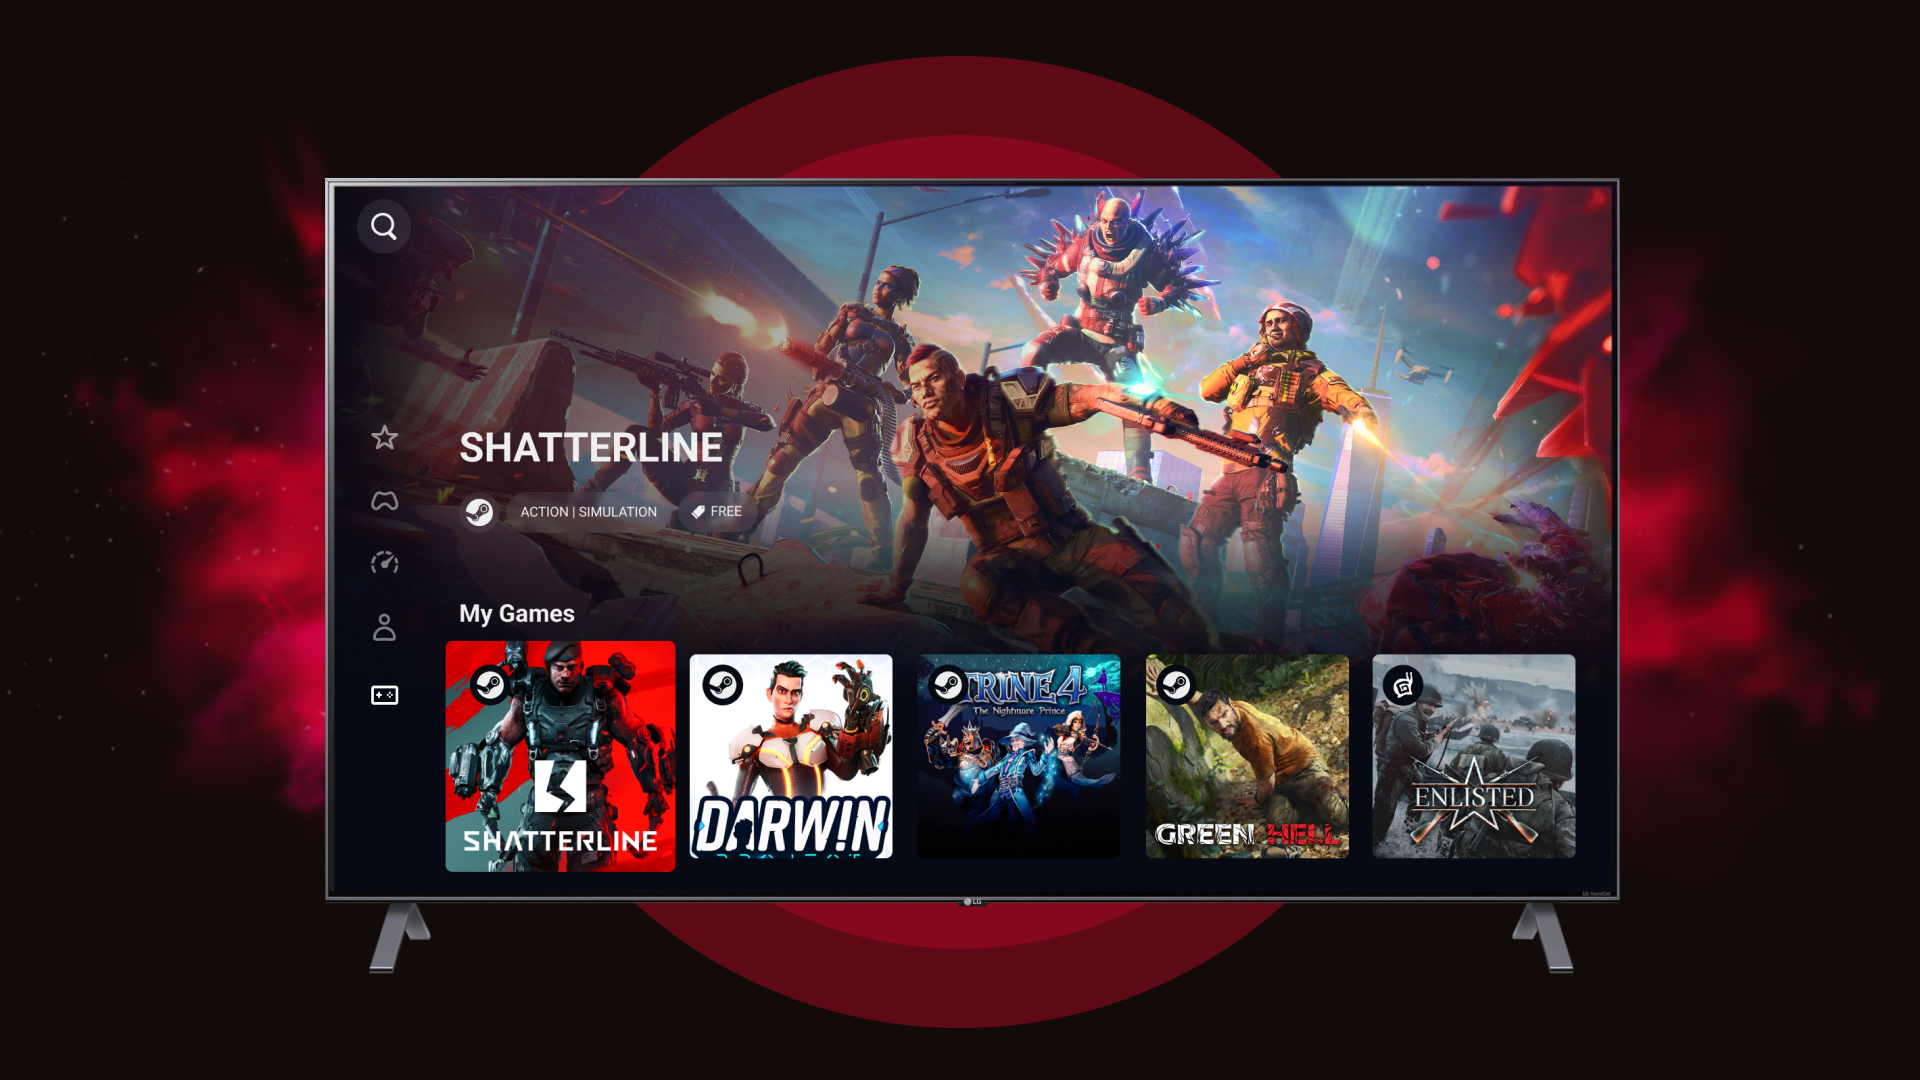 LG TVs get the GeForce Now cloud gaming treatment